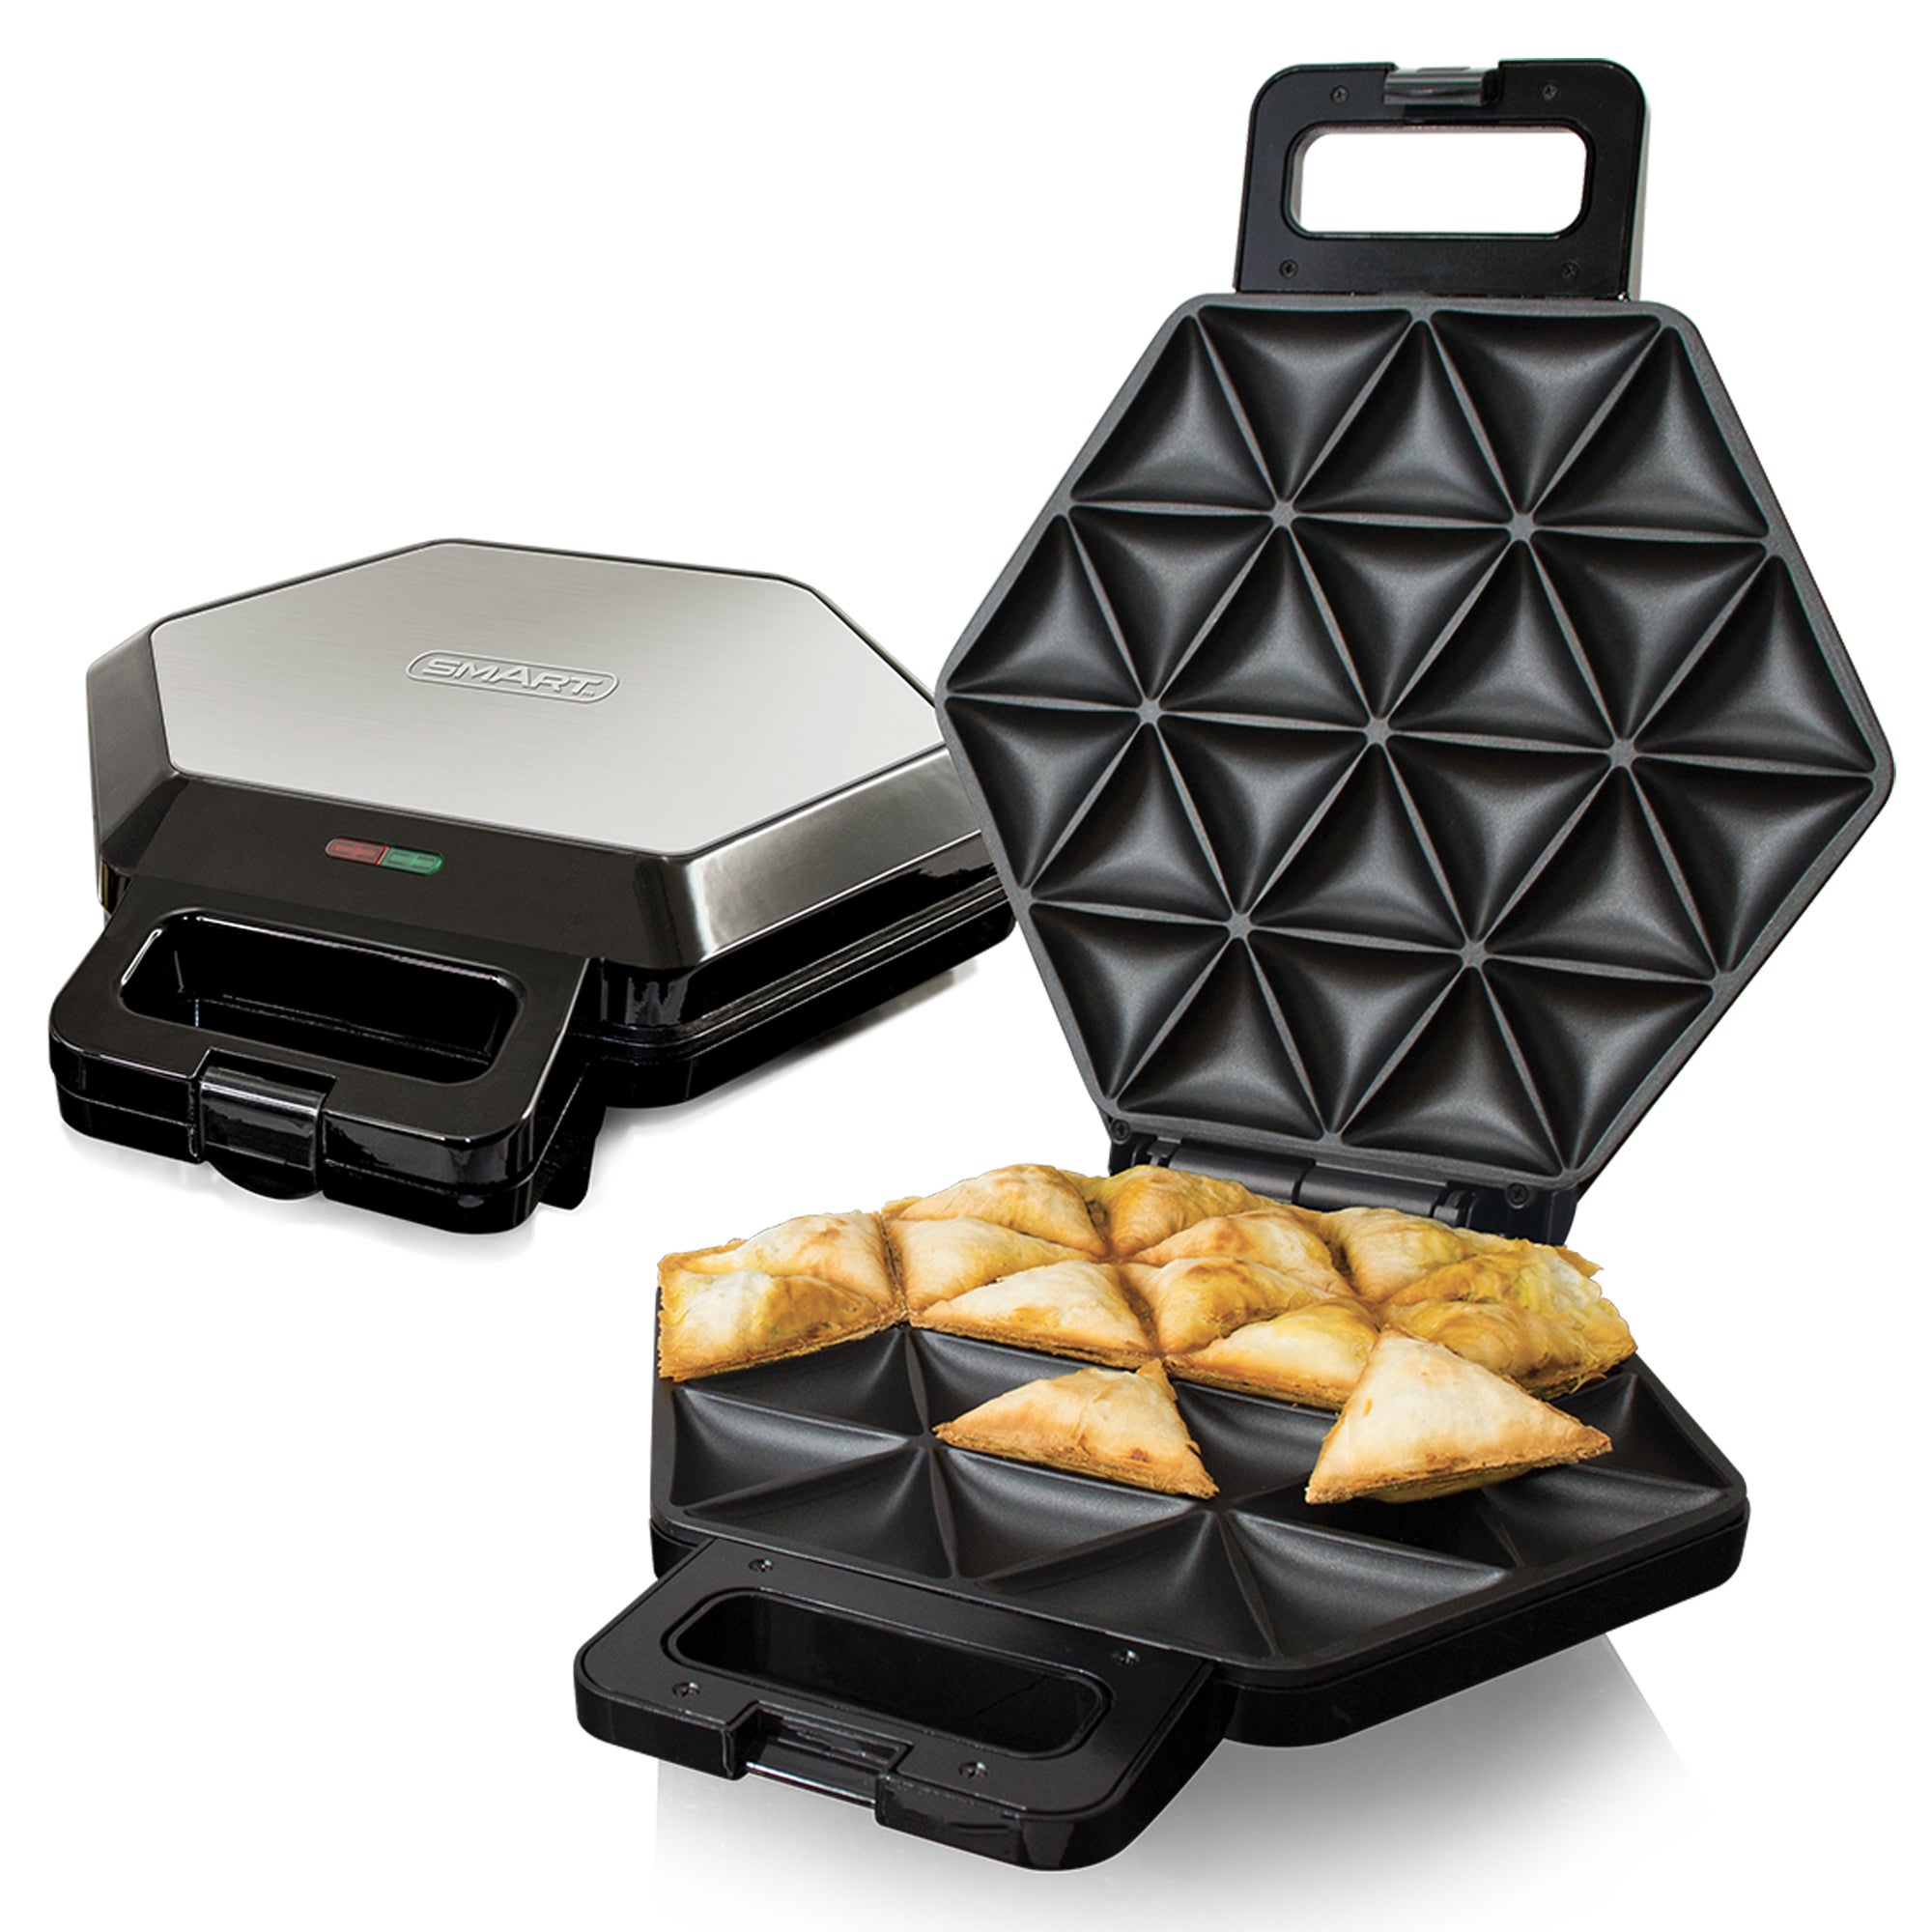 How about making quiches with the SMART Samosa Maker 